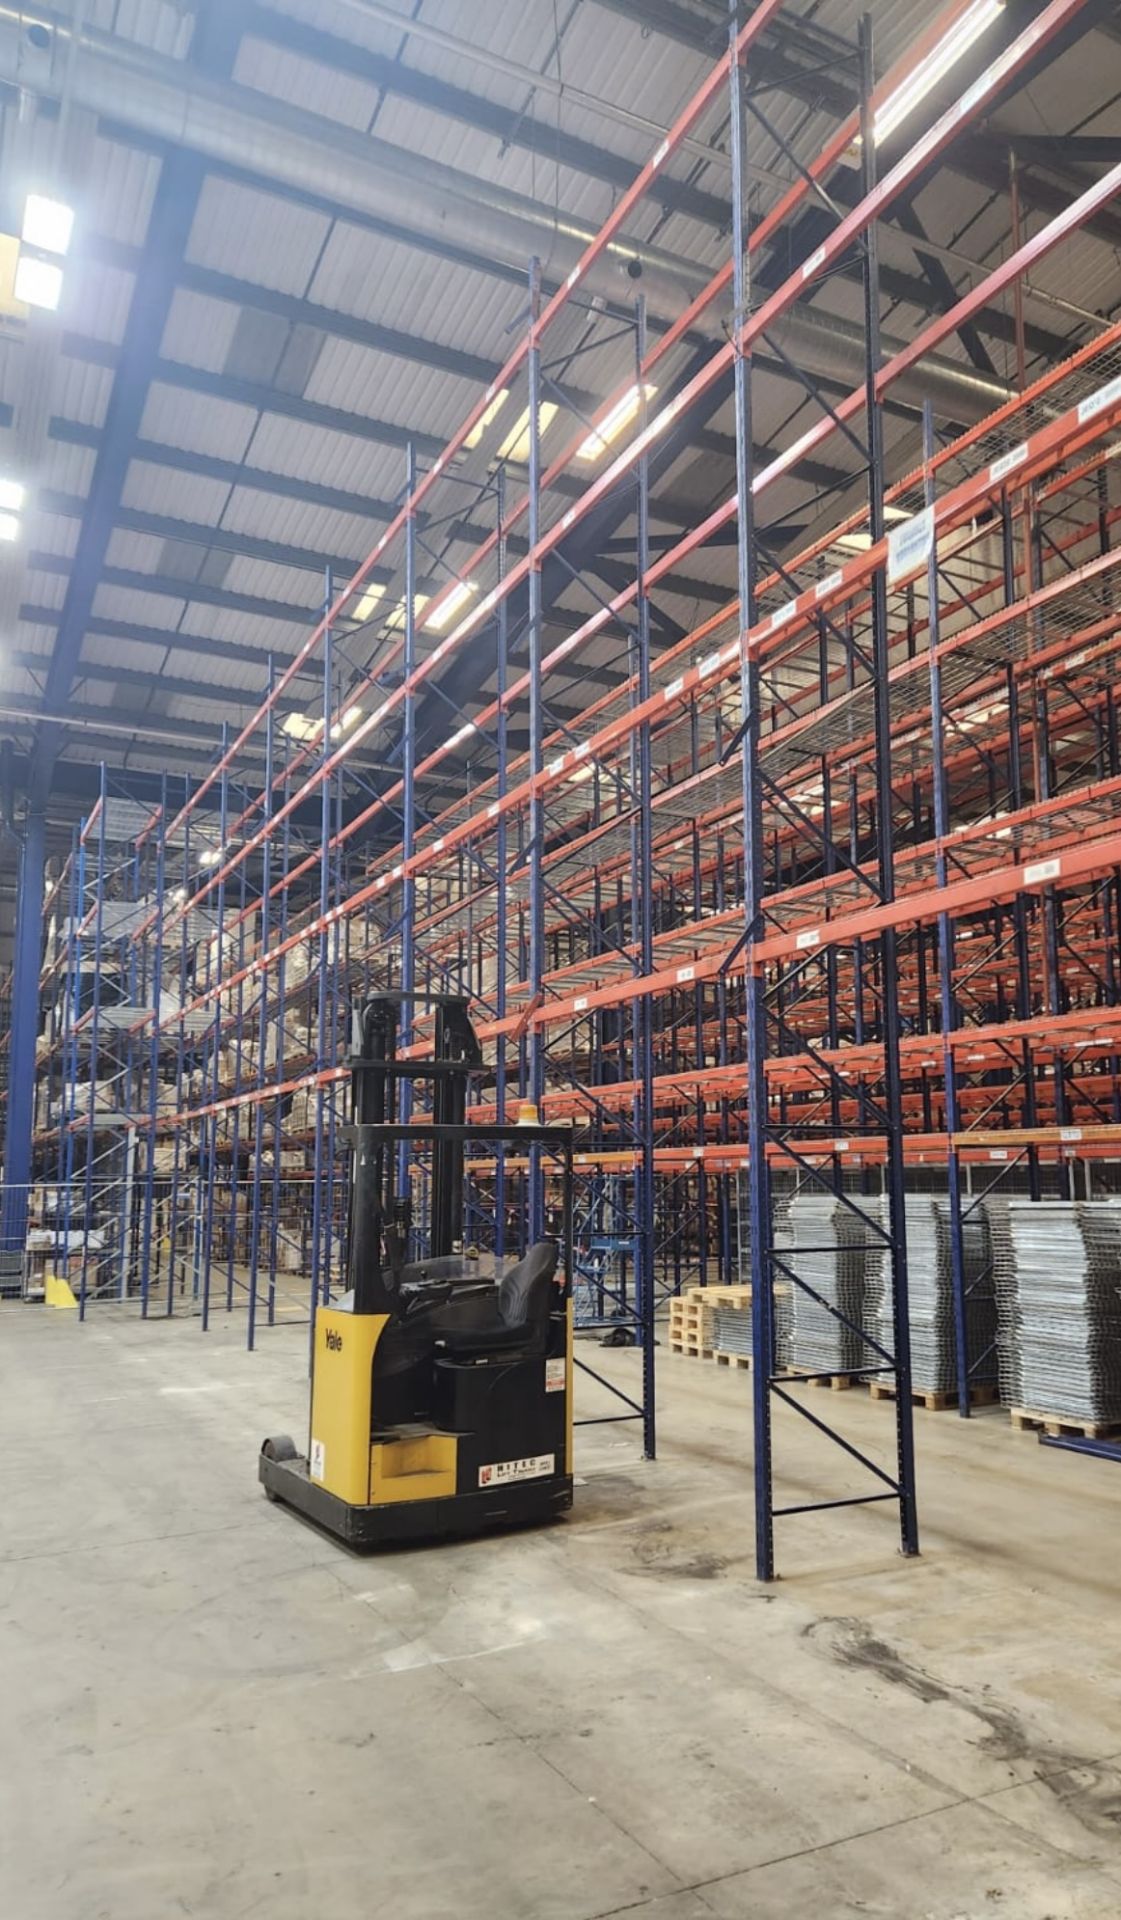 100 Bays of HiLo Racking - Industrial Pallet Racking - 2000kg per level - Image 2 of 2